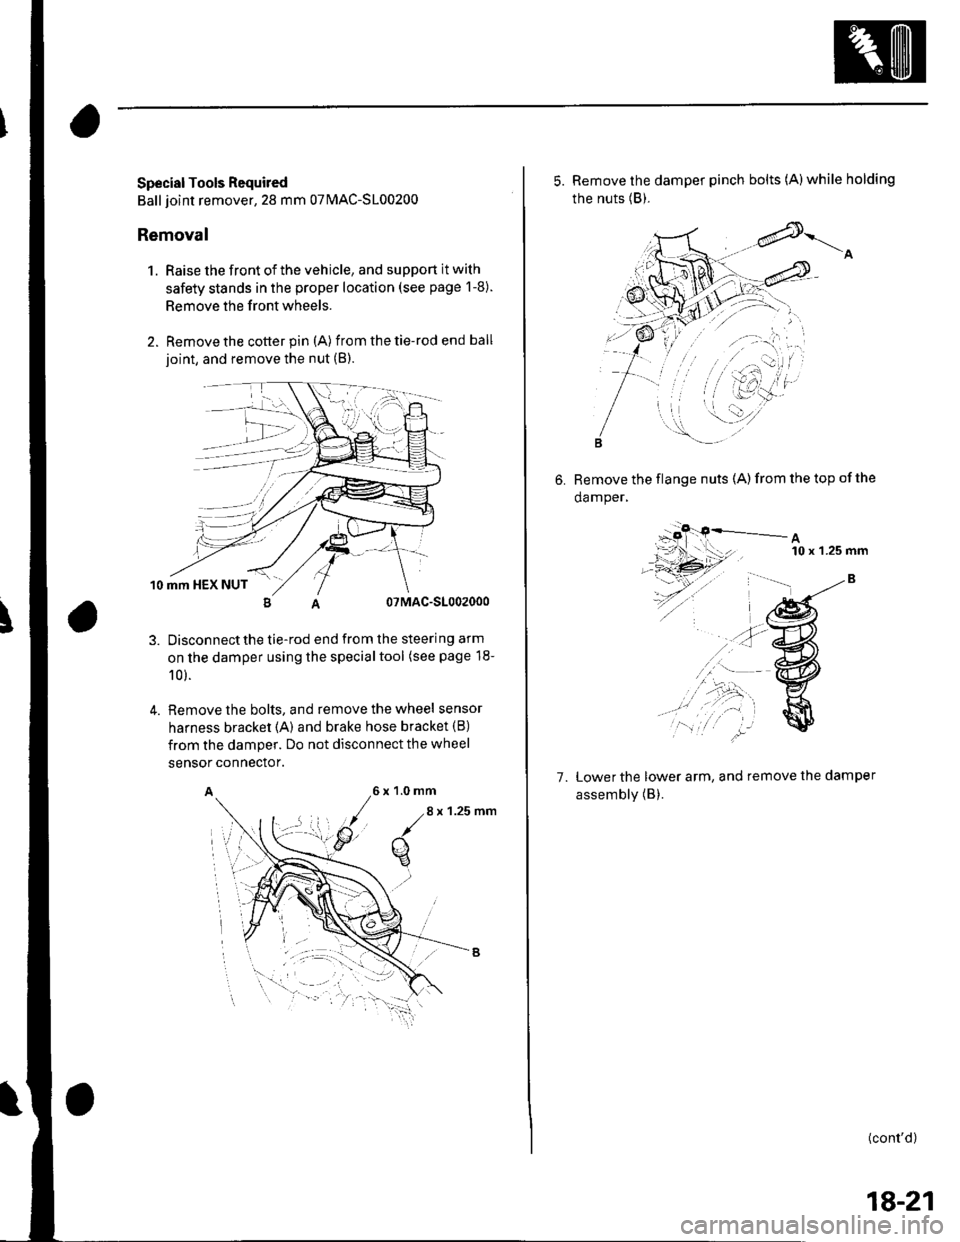 HONDA CIVIC 2003 7.G User Guide Special Tools Required
Ball joint remover,28 mm 07MAC-S100200
Removal
1. Raise the front of the vehicle, and support it with
safety stands in the proper location (see page 1-8).
Remove the front wheel